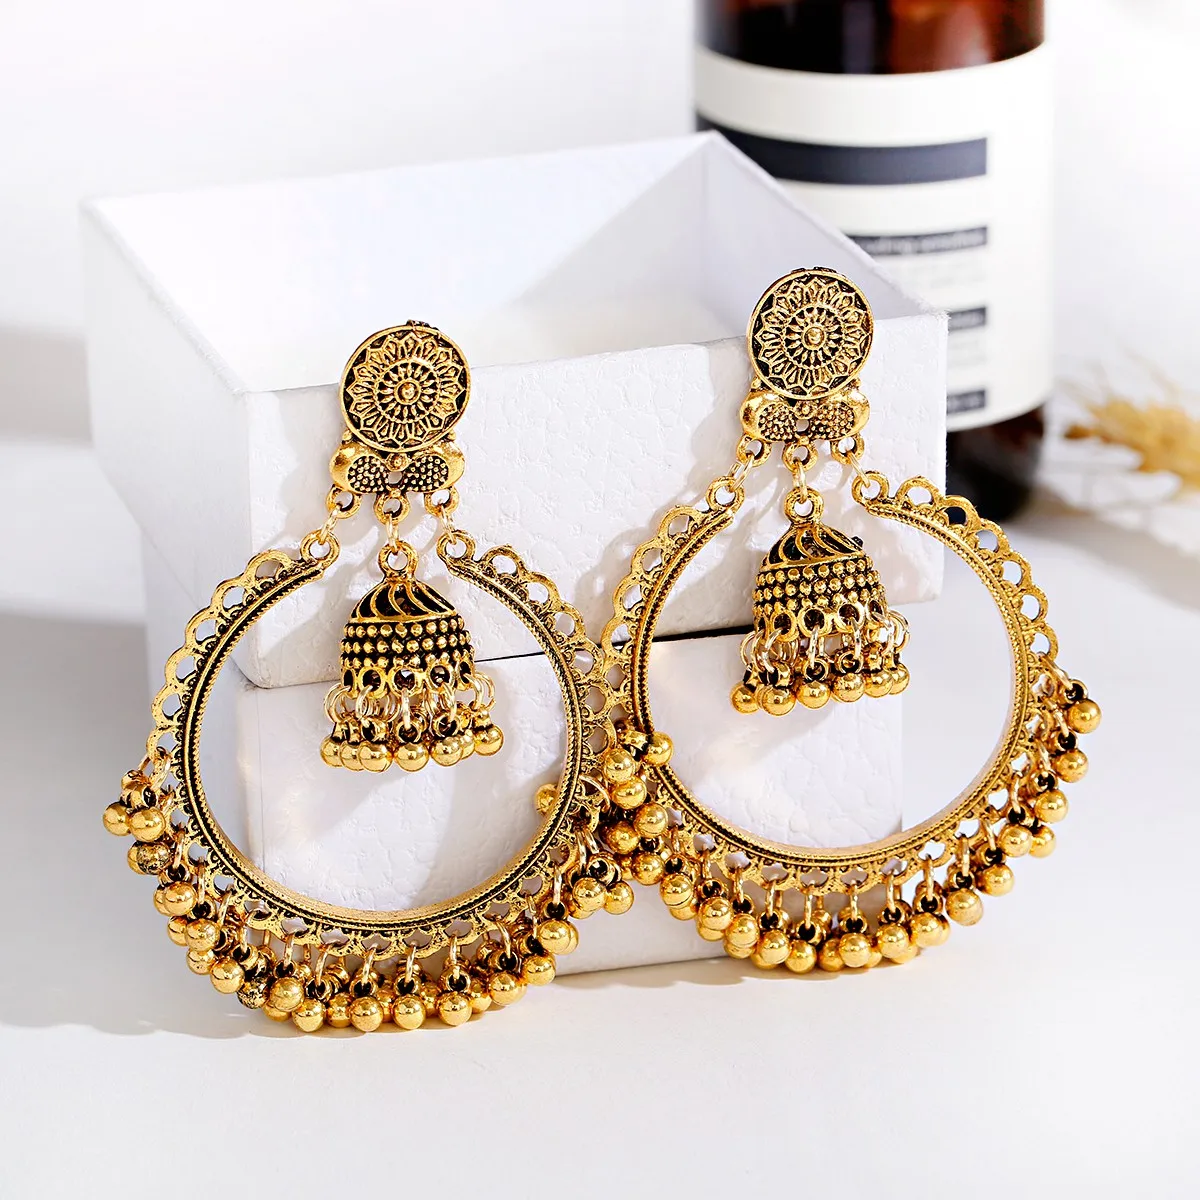 

Indian Traditional Jewelry Fashion Vintage Jhumki Gold Bell Shaped Big Jhumka Earrings